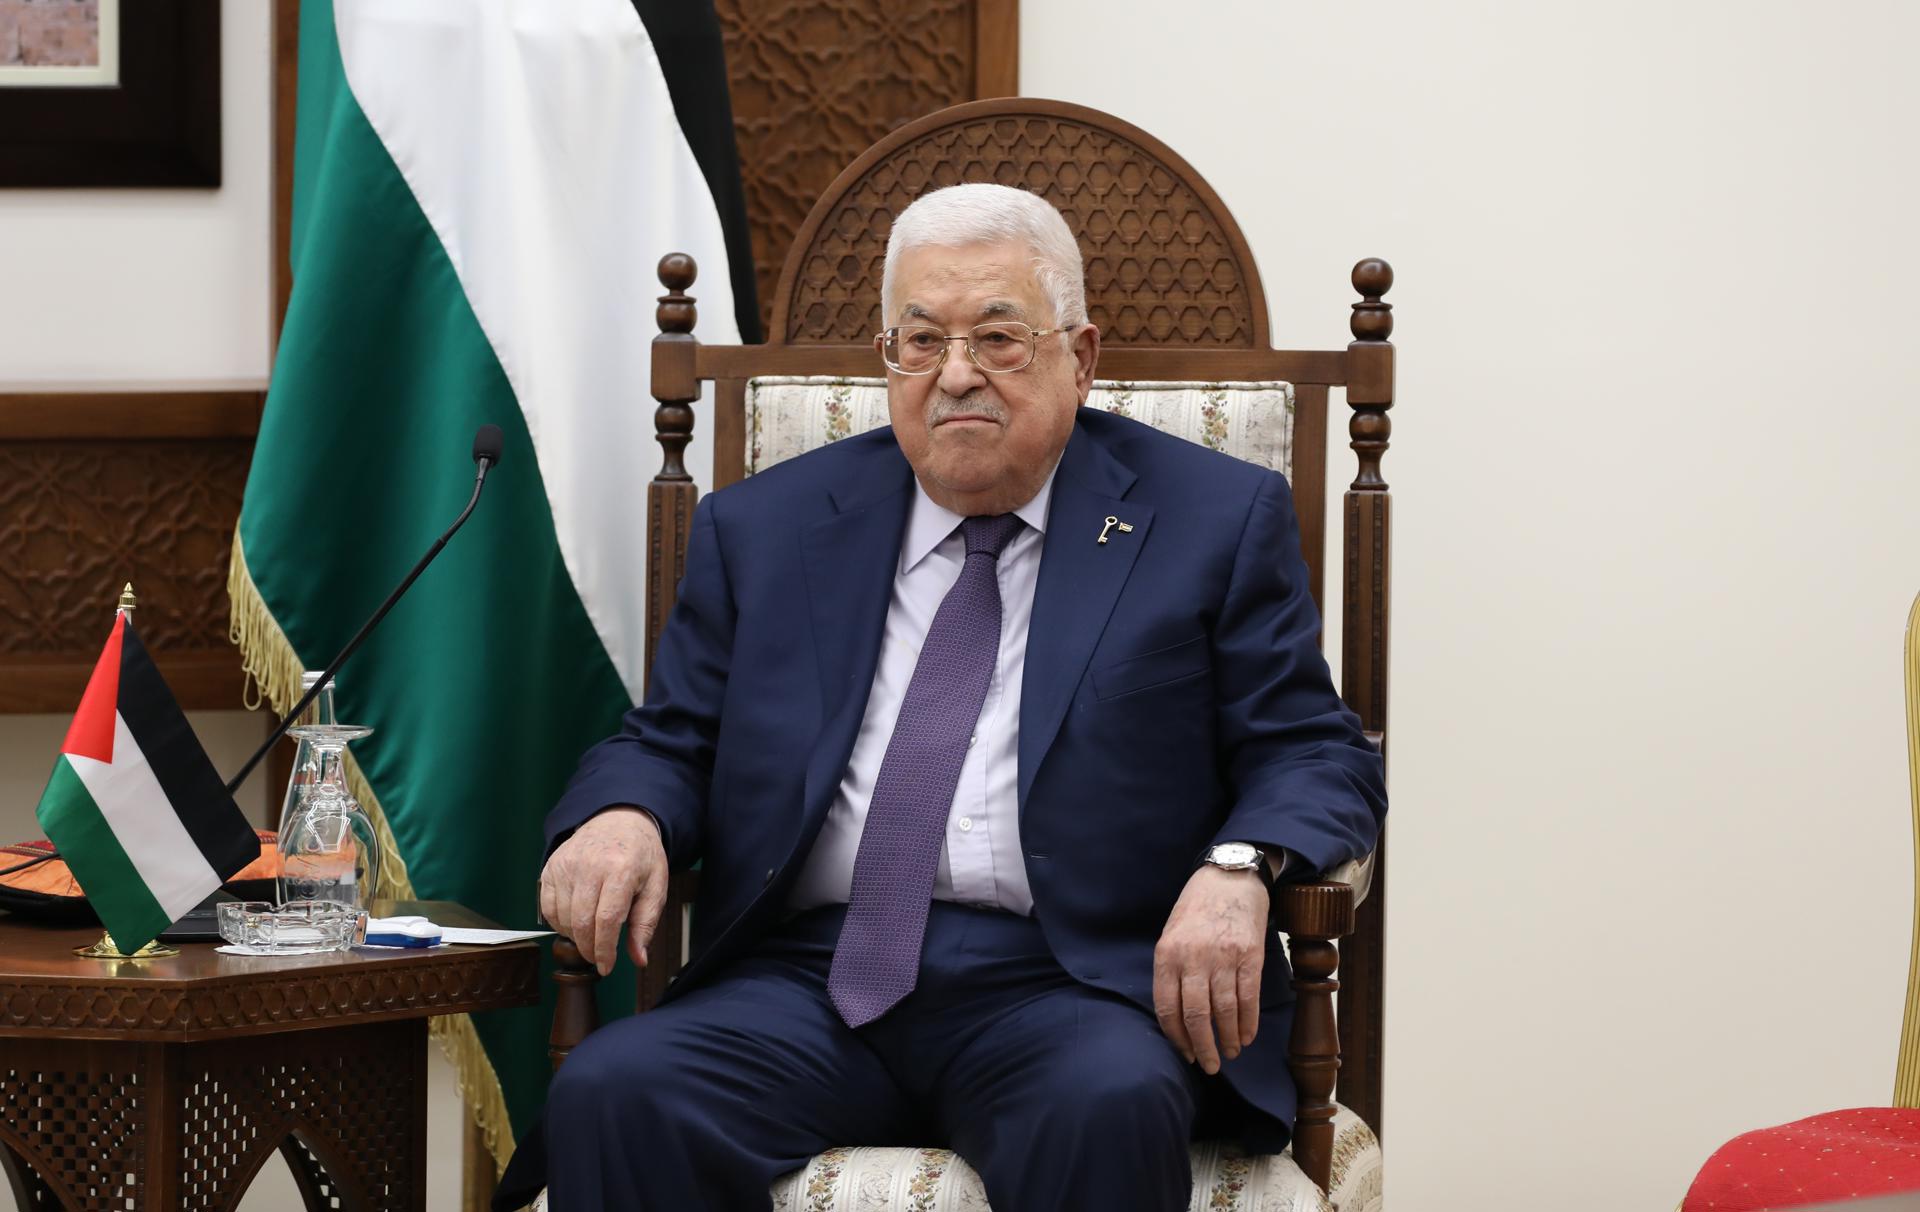 Palestinian President Mahmoud Abbas looks on during a meeting with US Secretary of State Antony Blinken (not pictured) in the West Bank city of Ramallah, 05 November 2023. EFE-EPA/ALAA BADARNEH / POOL
